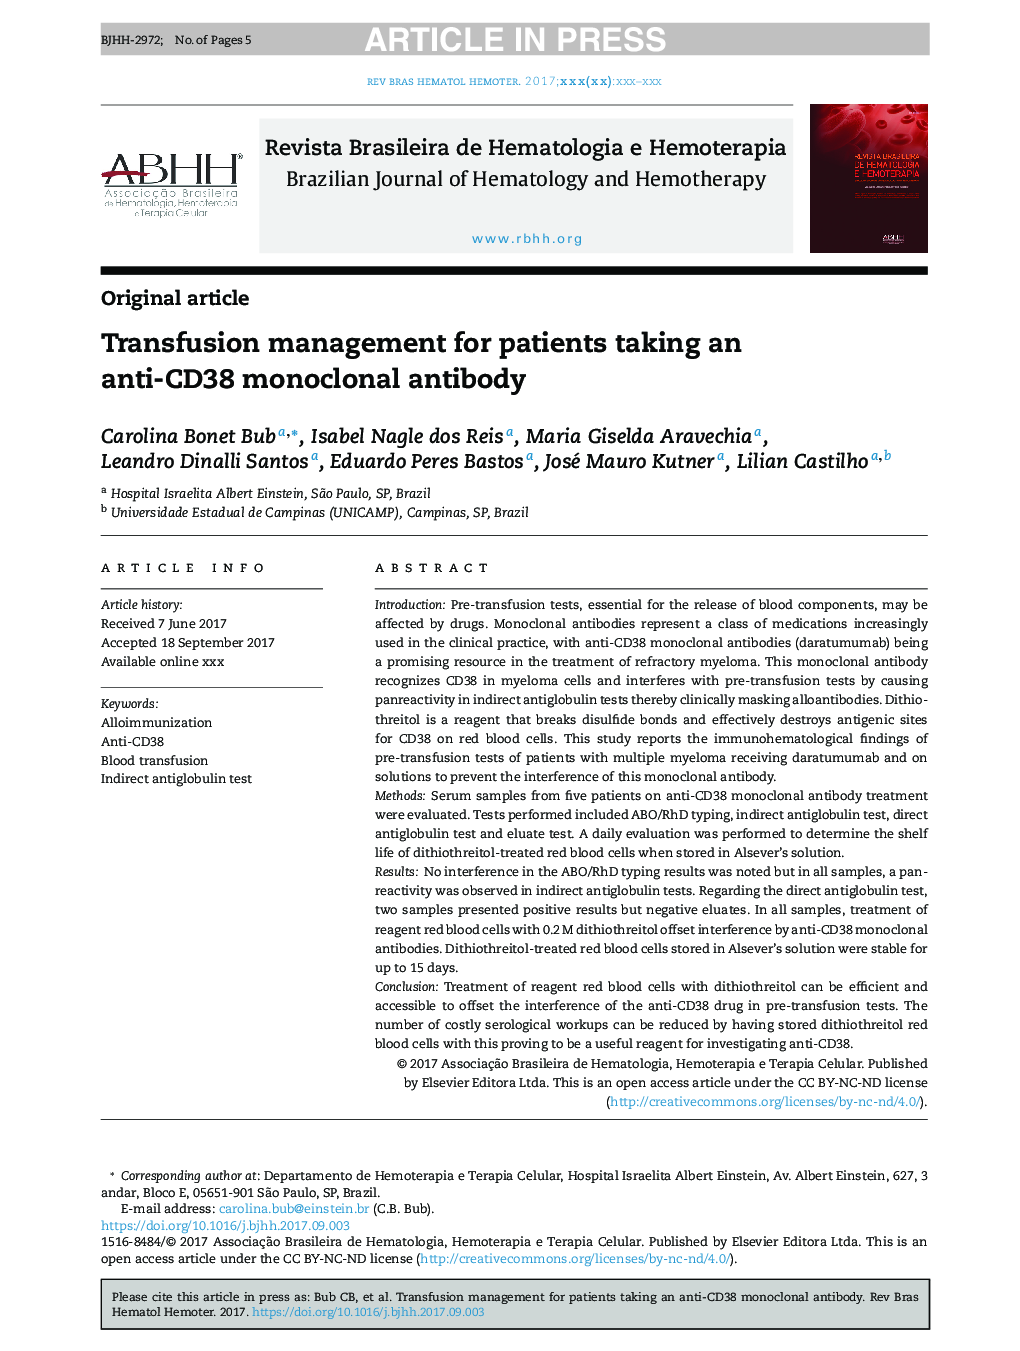 Transfusion management for patients taking an anti-CD38 monoclonal antibody